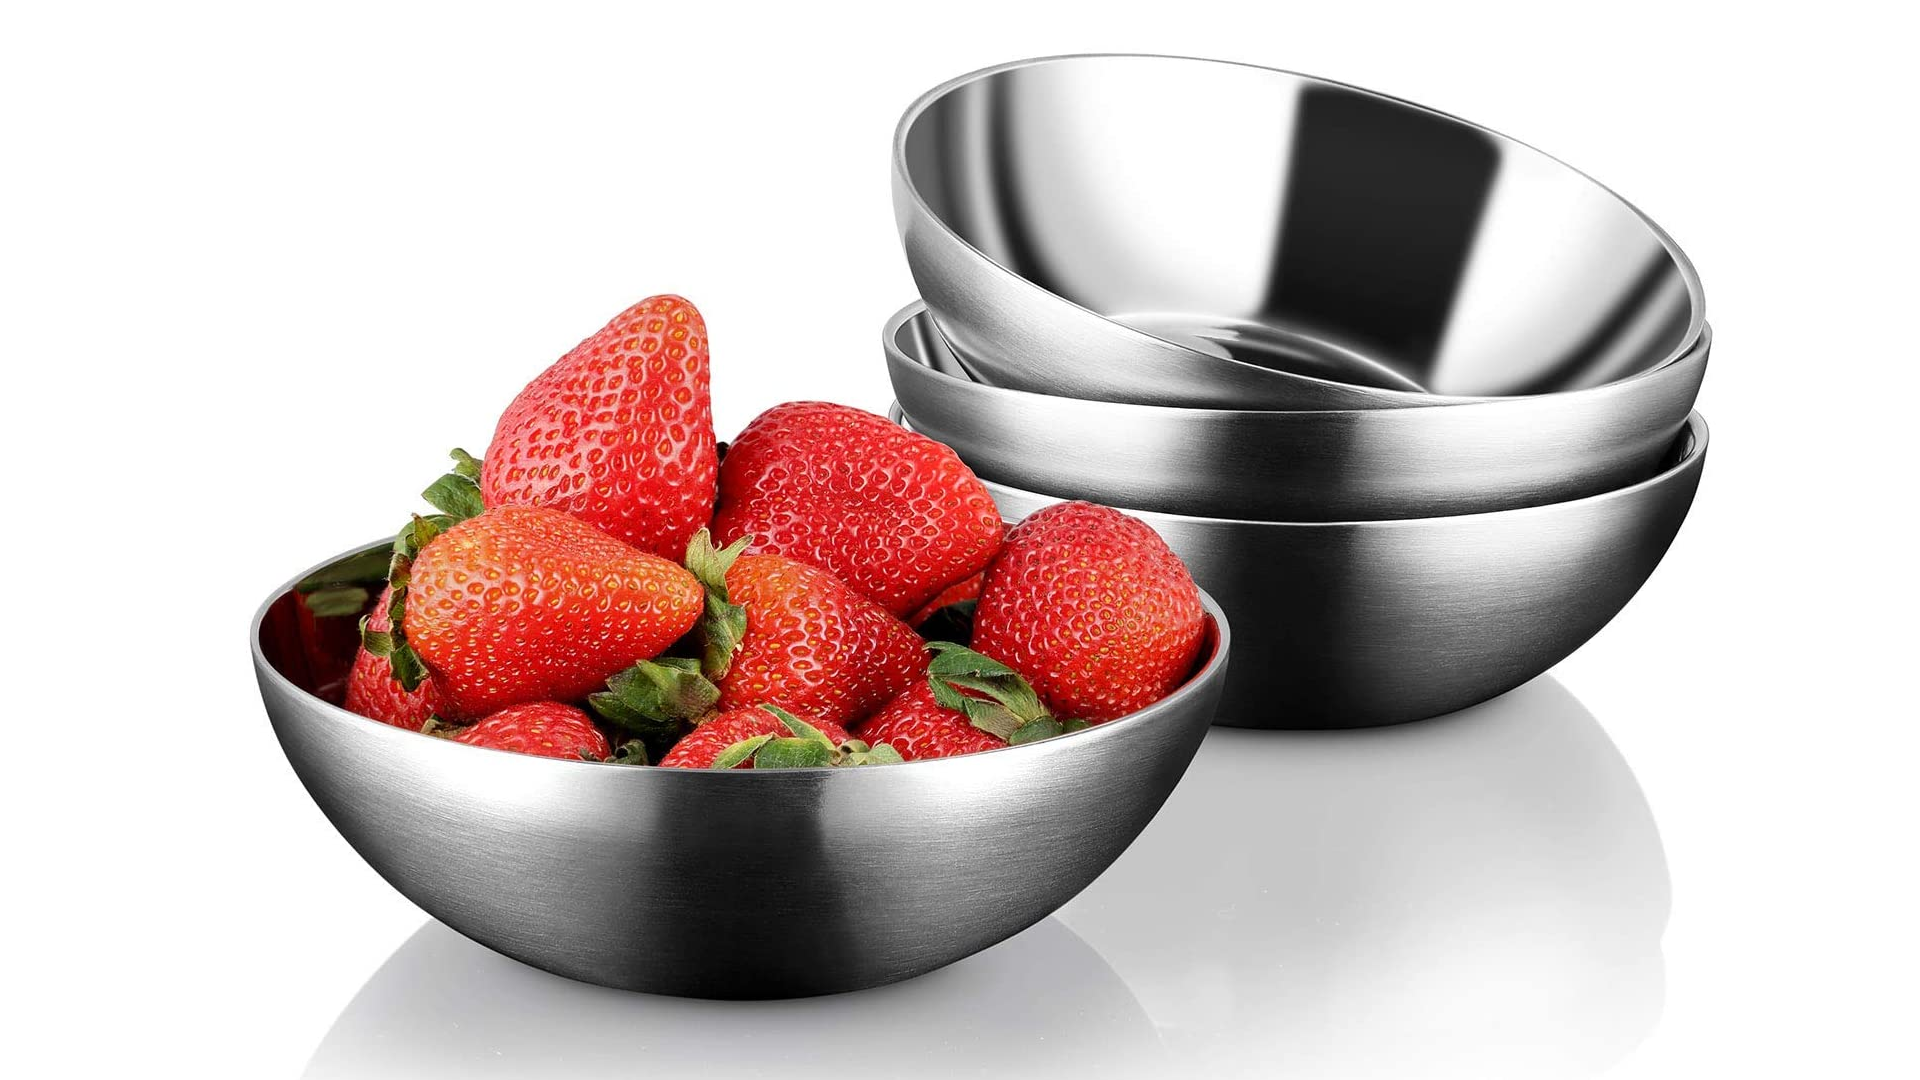 stainless steel bowls